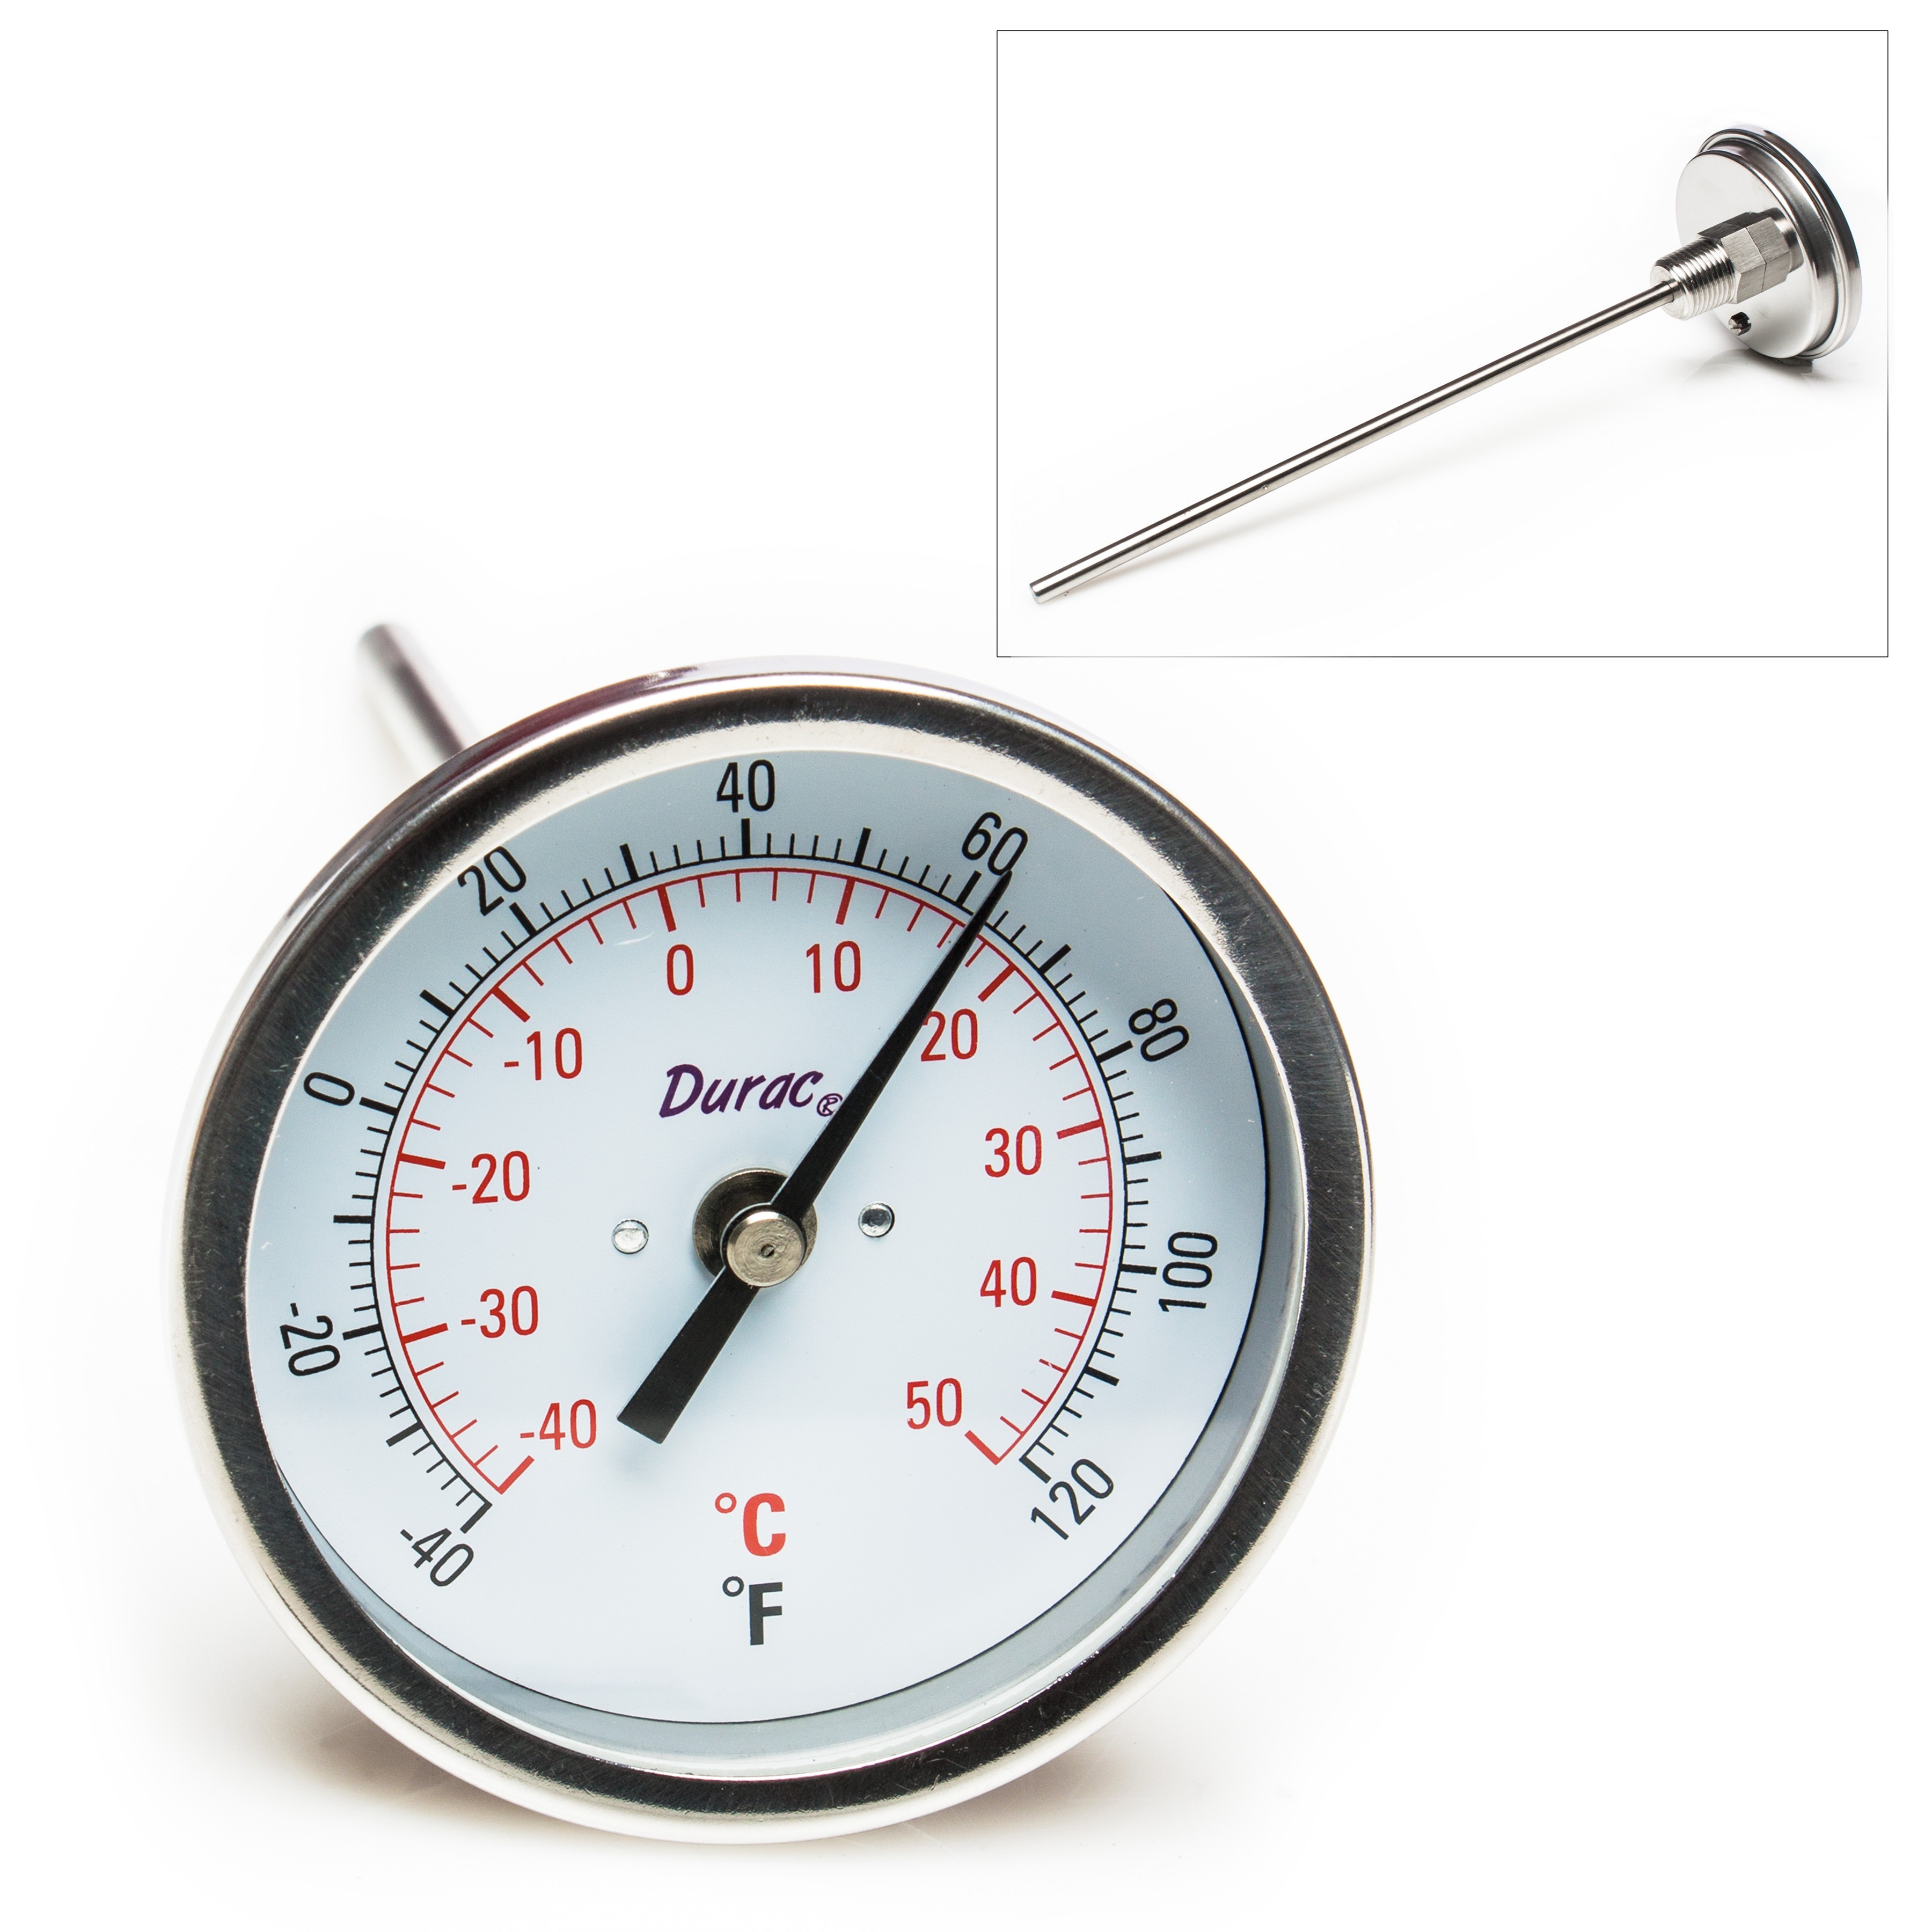 SP Bel-Art, H-B DURAC Bi-Metallic Dial Thermometer; -40 to 50C (-40 to 120F), 1/2 in. NPT Threaded Connection, 75mm Dial